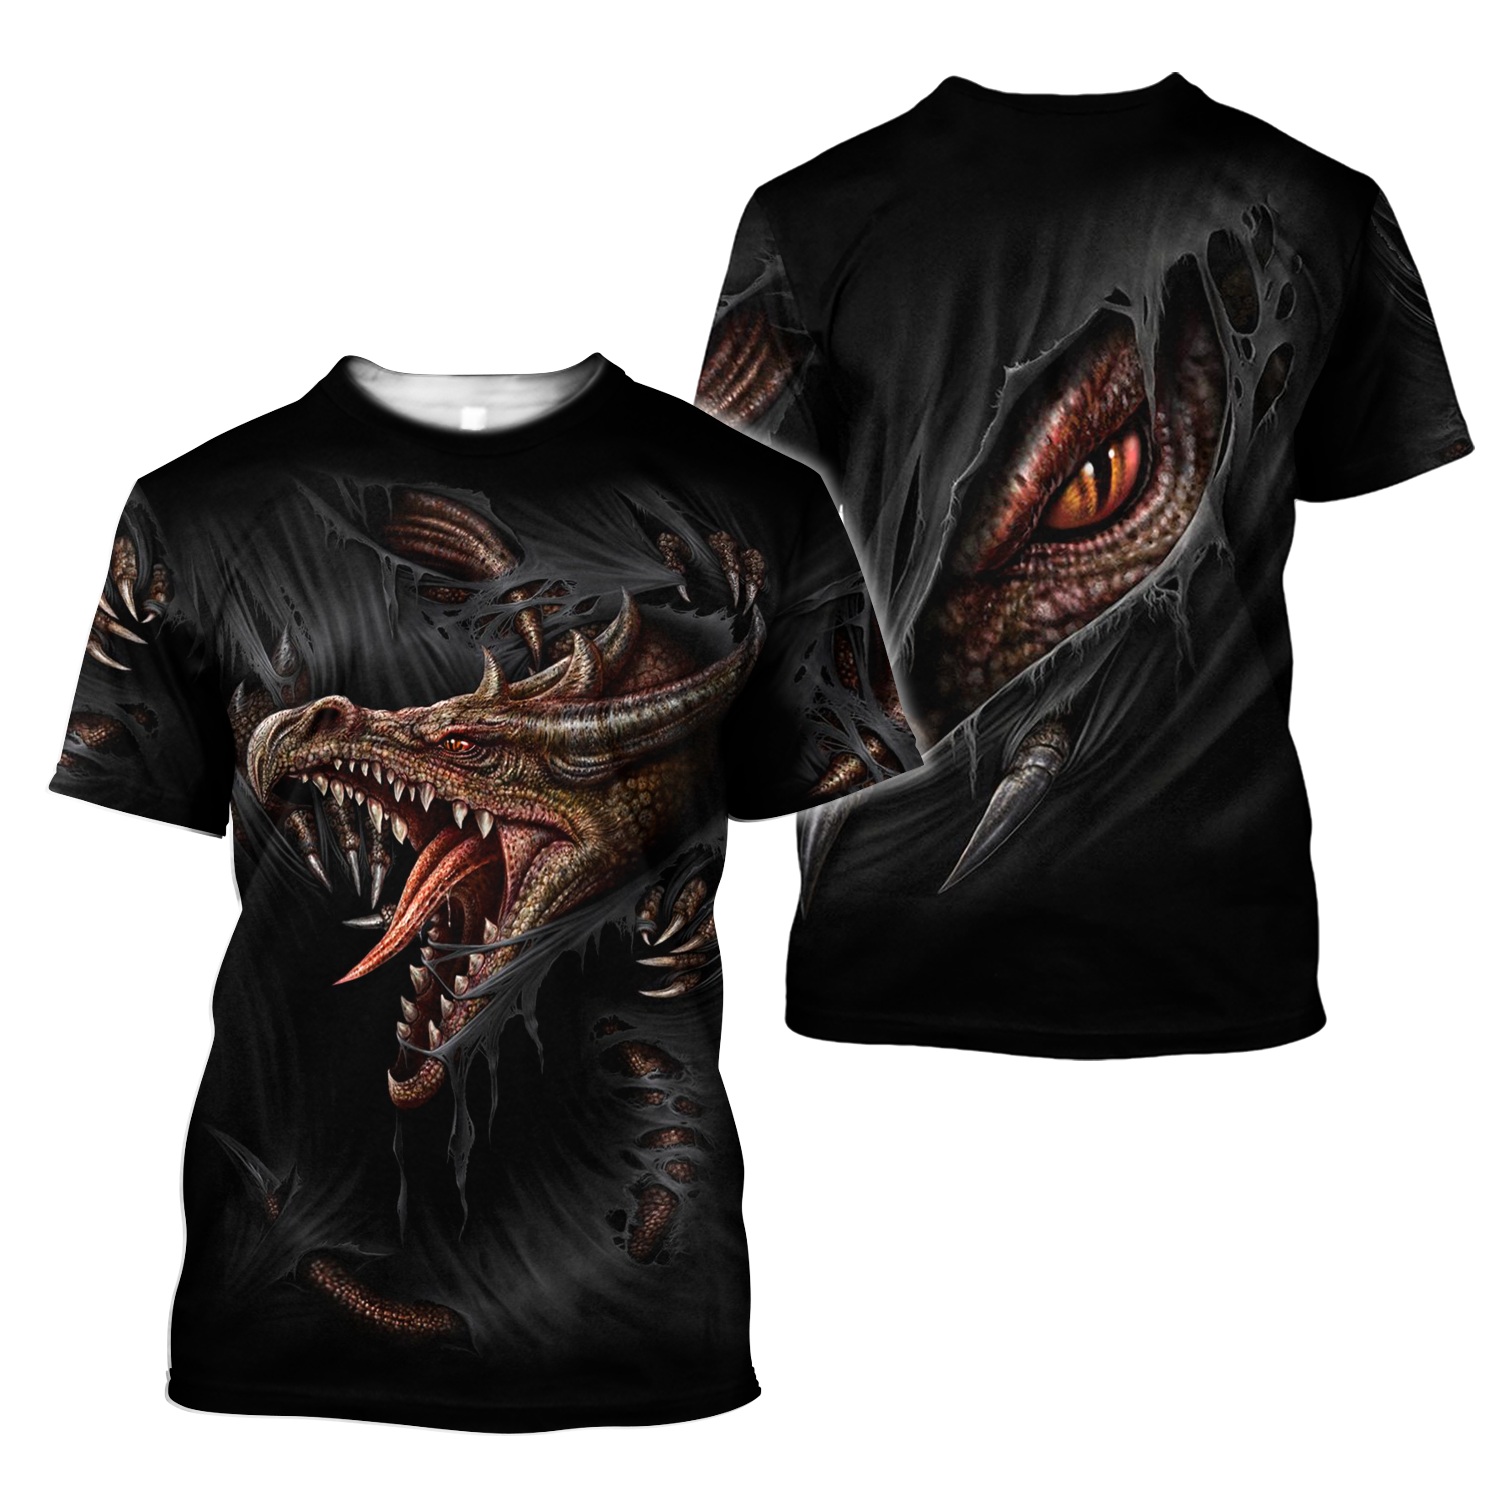 3D Armor Tattoo and Dungeon Dragon T-shirt